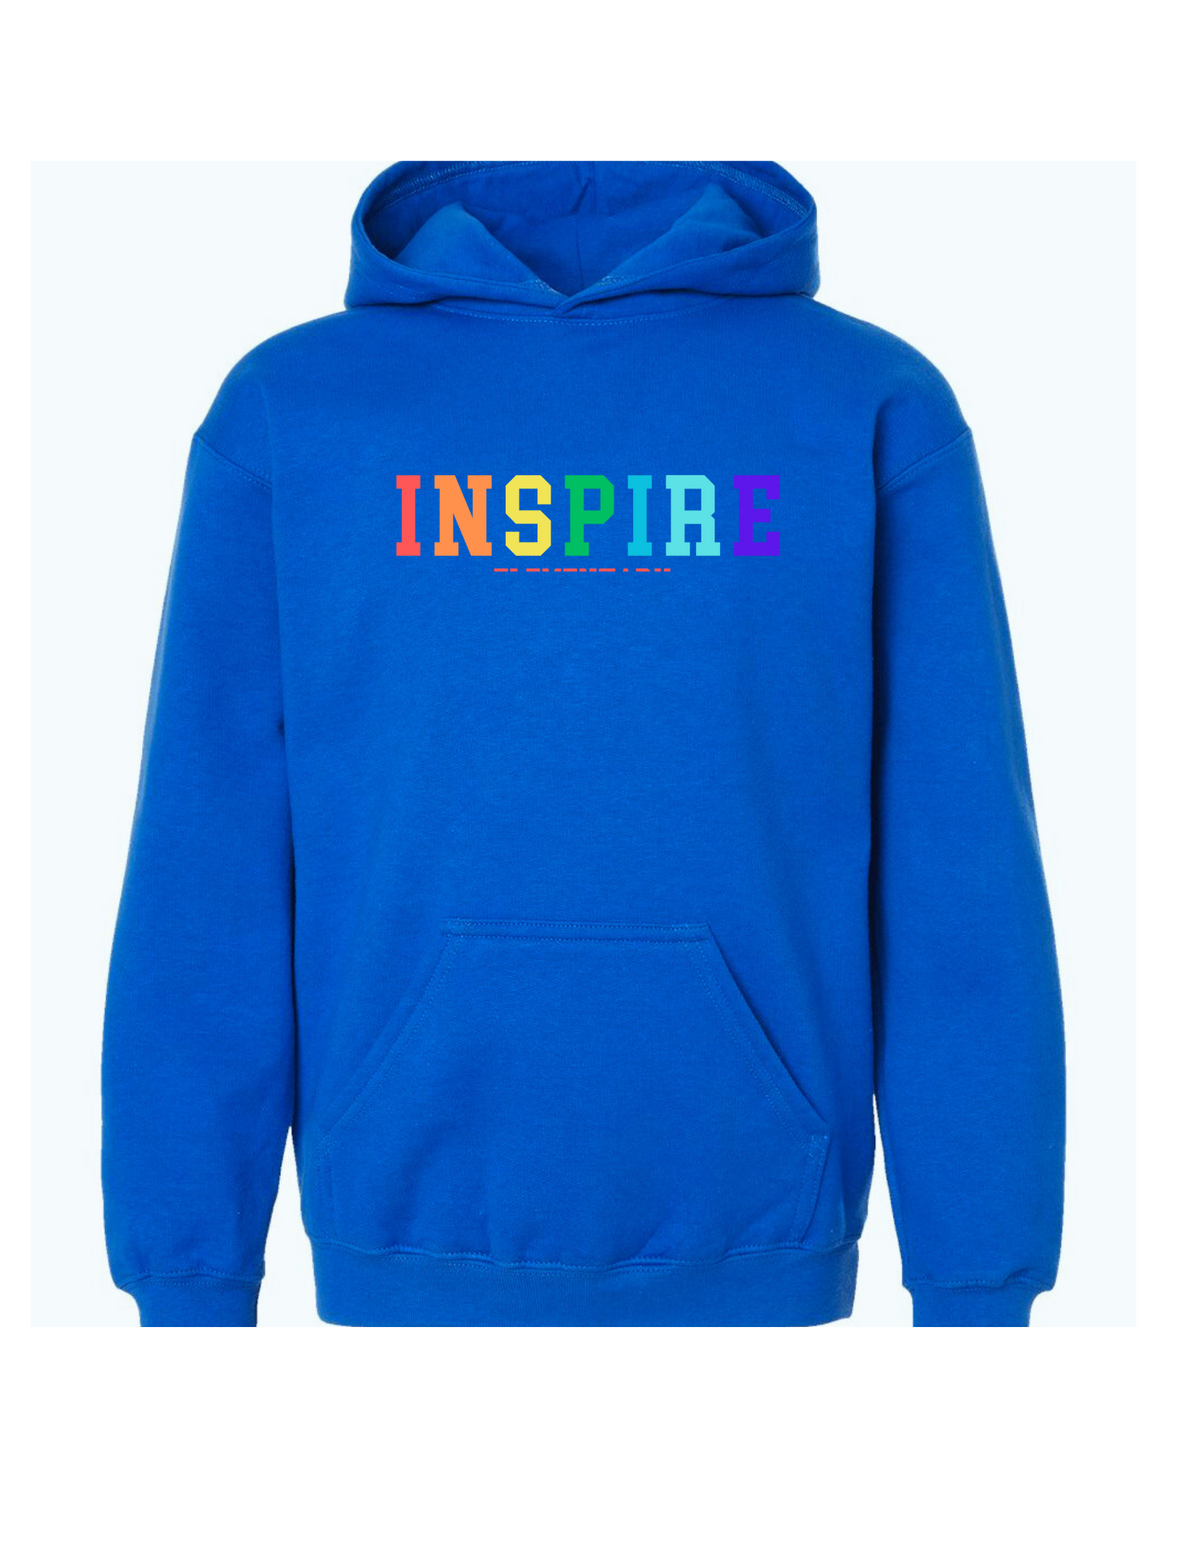 Inspire Colorful Blue Hoodie - ADULT ONLY - Aspen Lane 